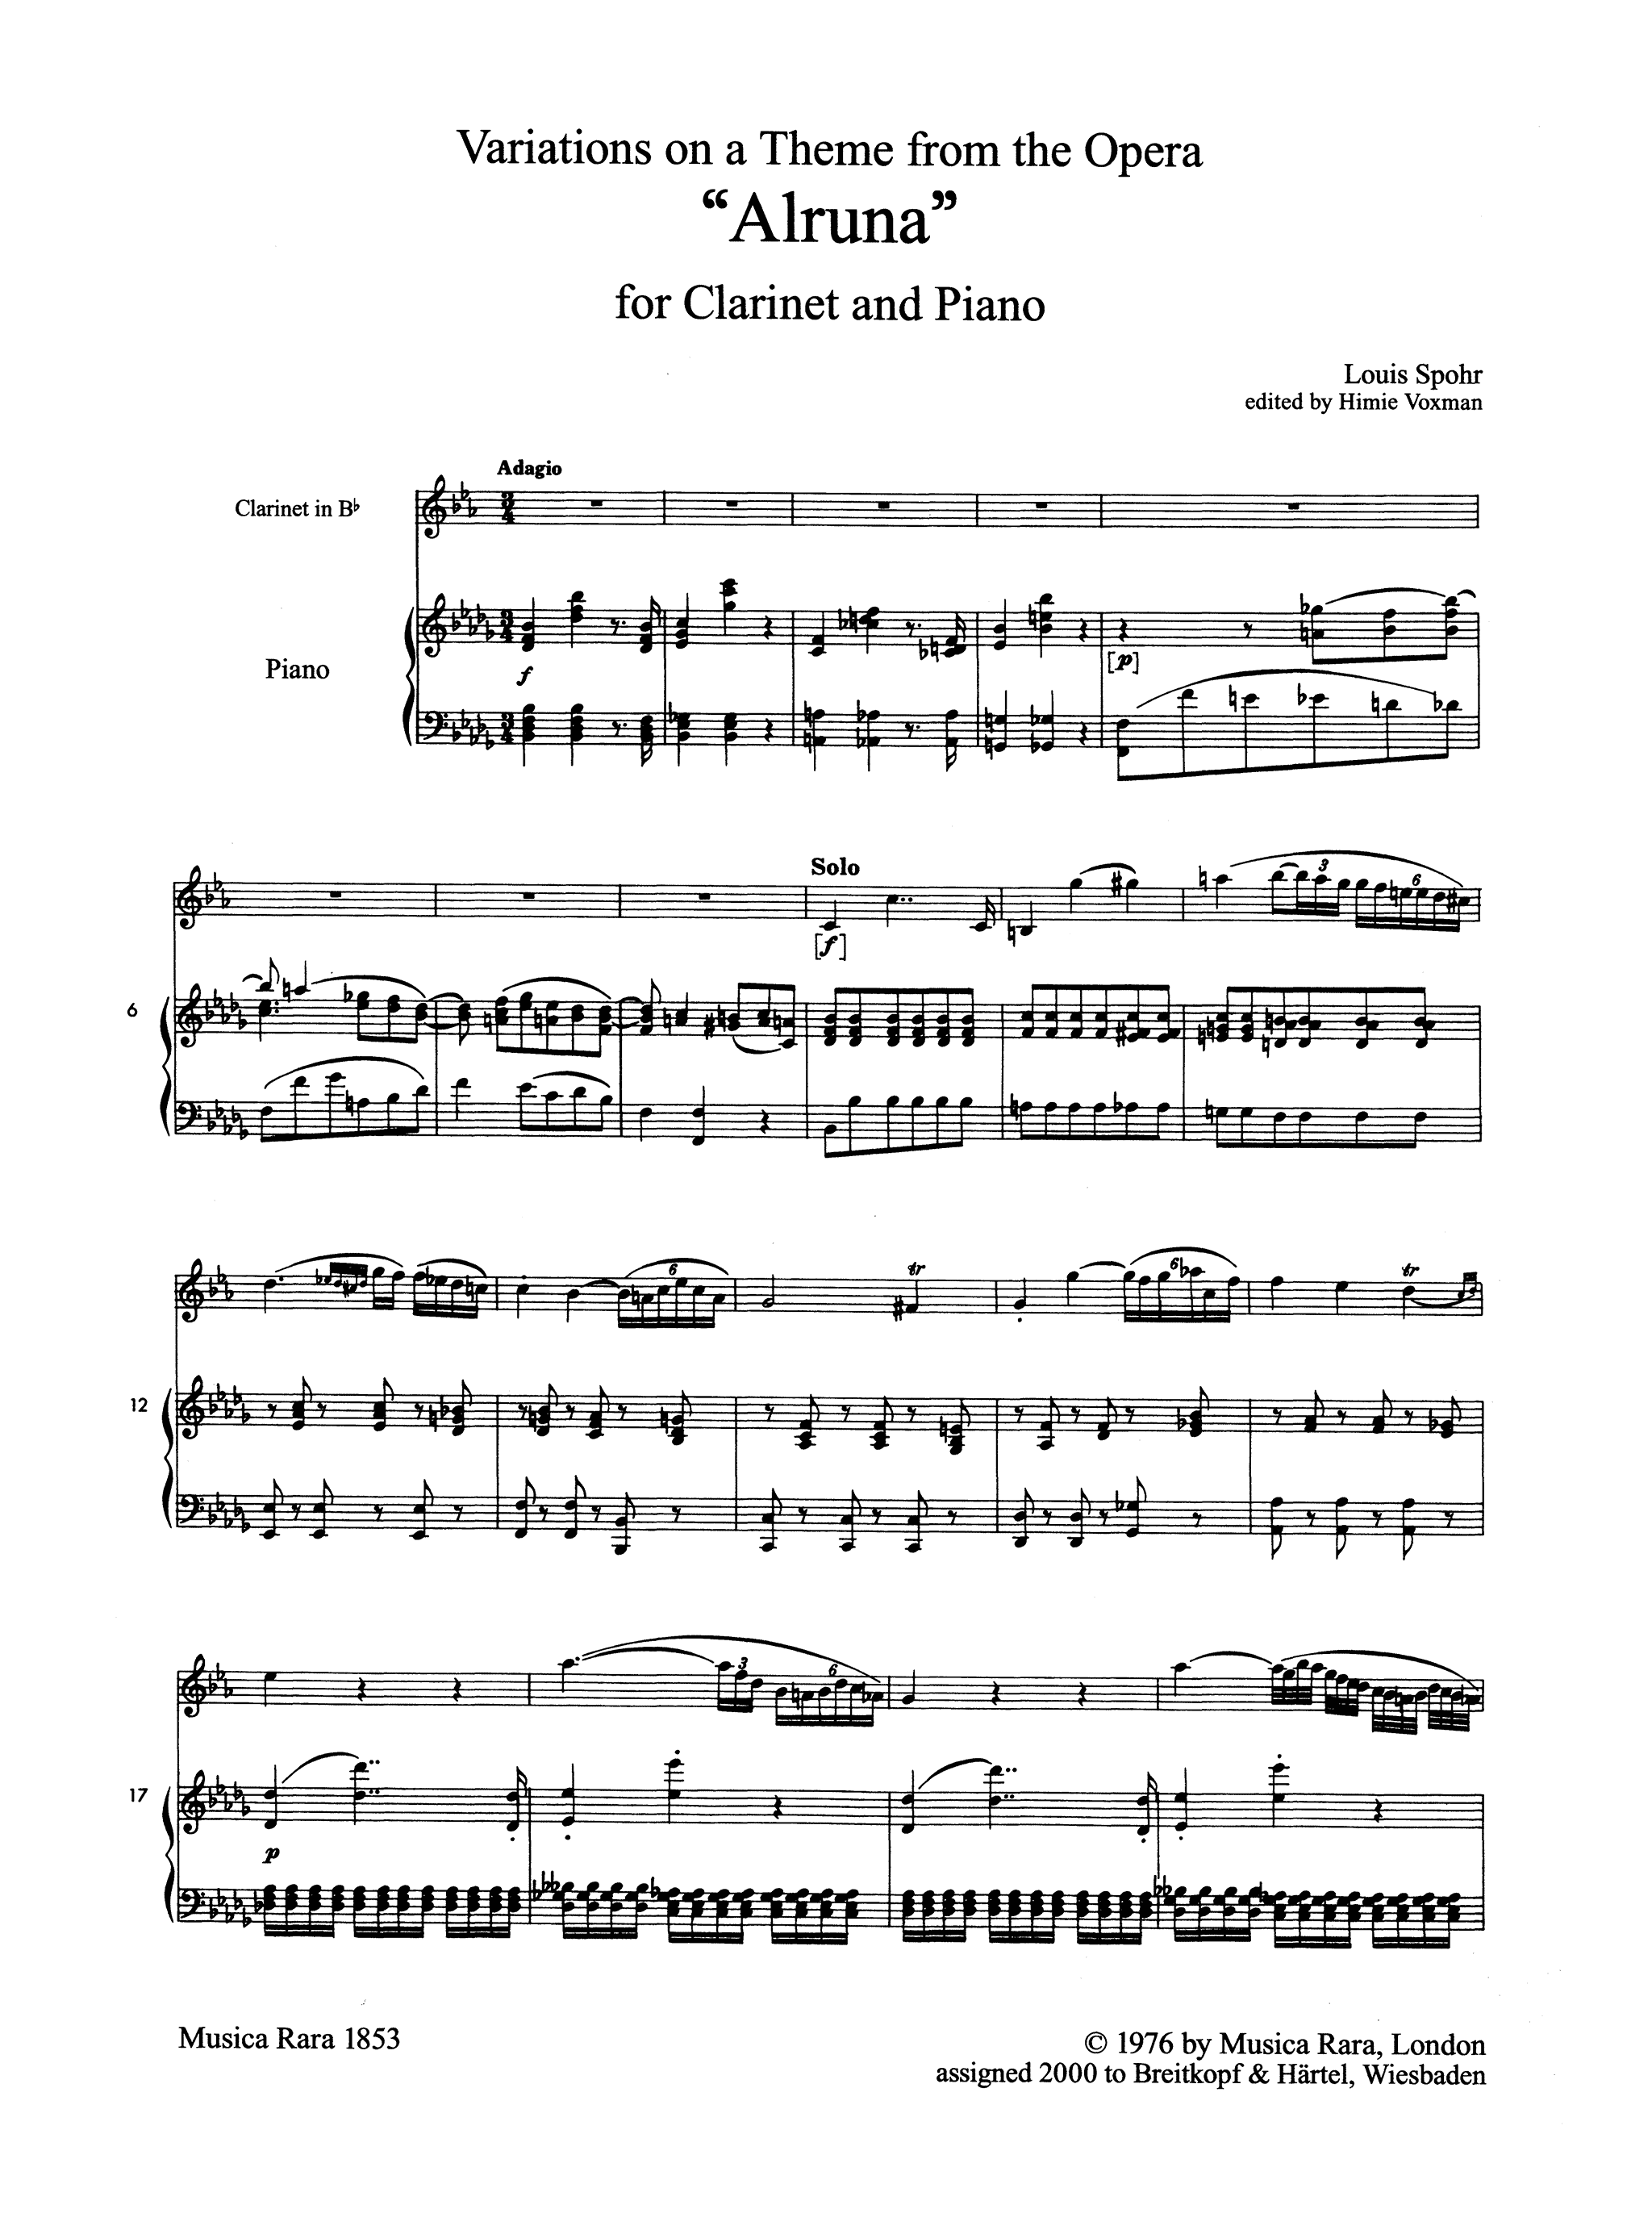 Spohr Variations on a Theme from 'Alruna,' WoO 15 Score